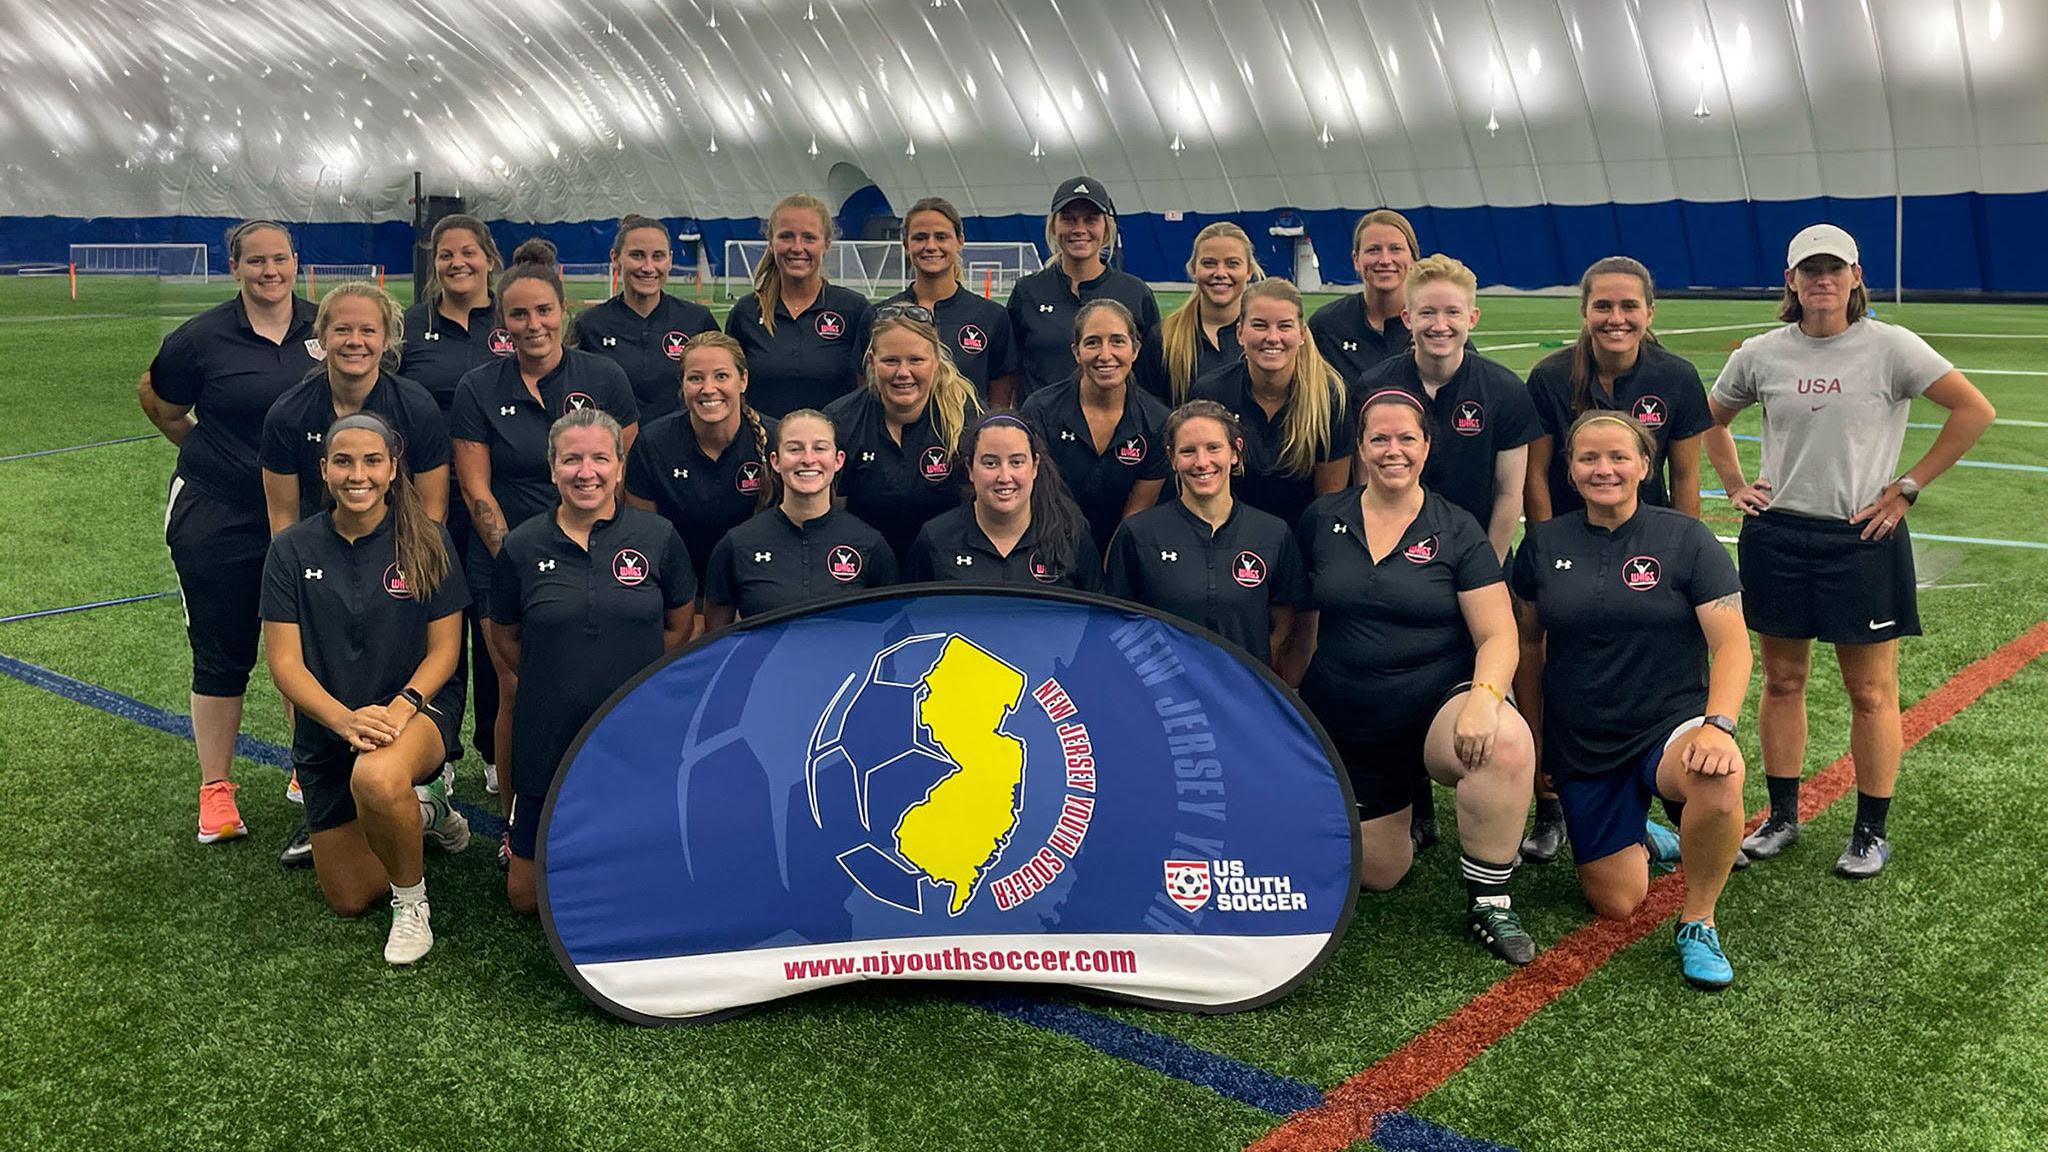 NJ Youth Soccer and WAGS to offer All-Female ‘C’ Coaching License Course